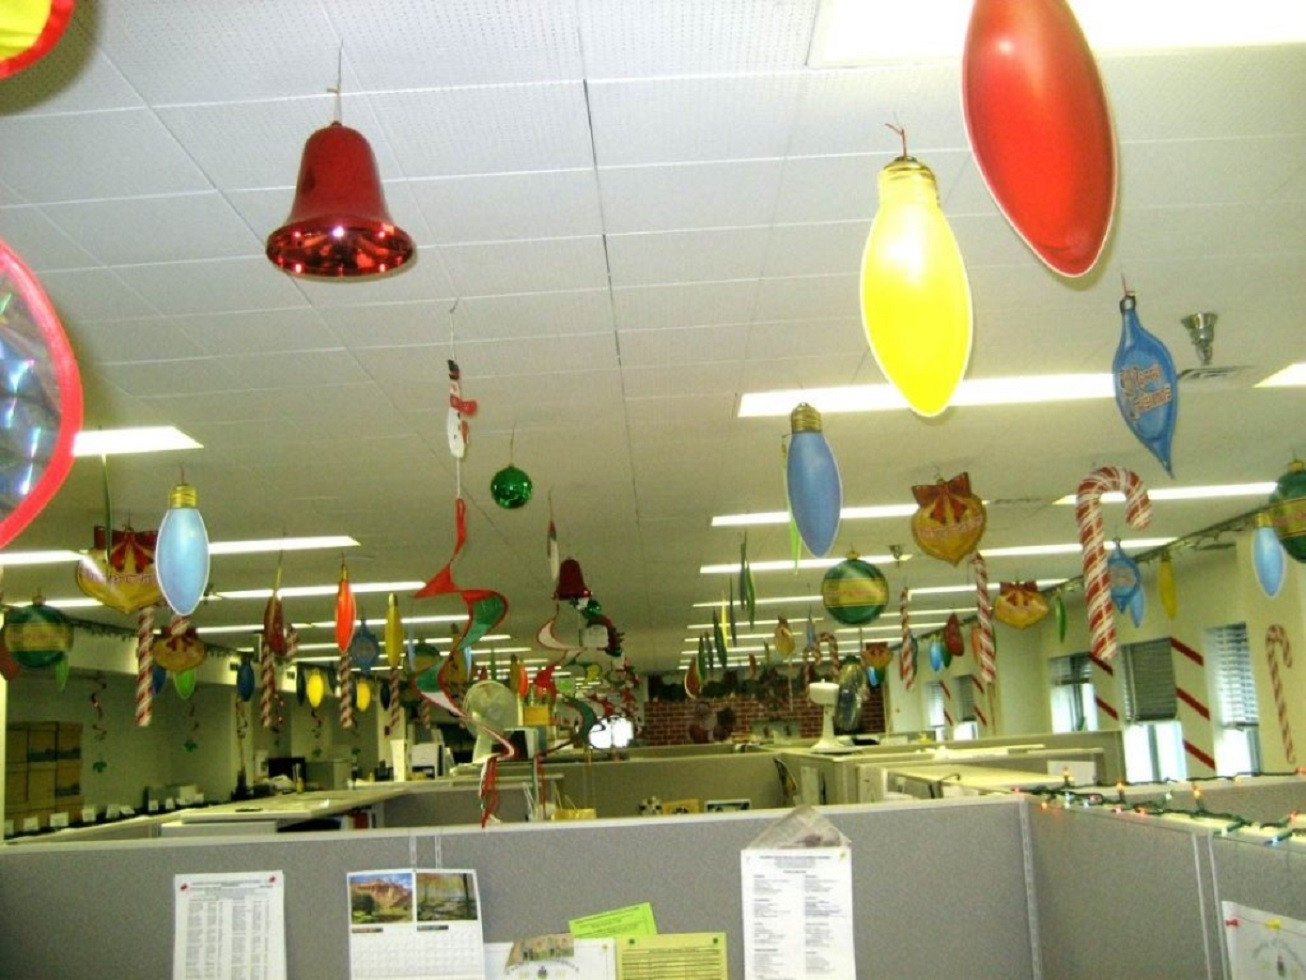 Office Holiday Party Theme Ideas
 5 New Year’s Party Ideas That Won’t Get You in Trouble